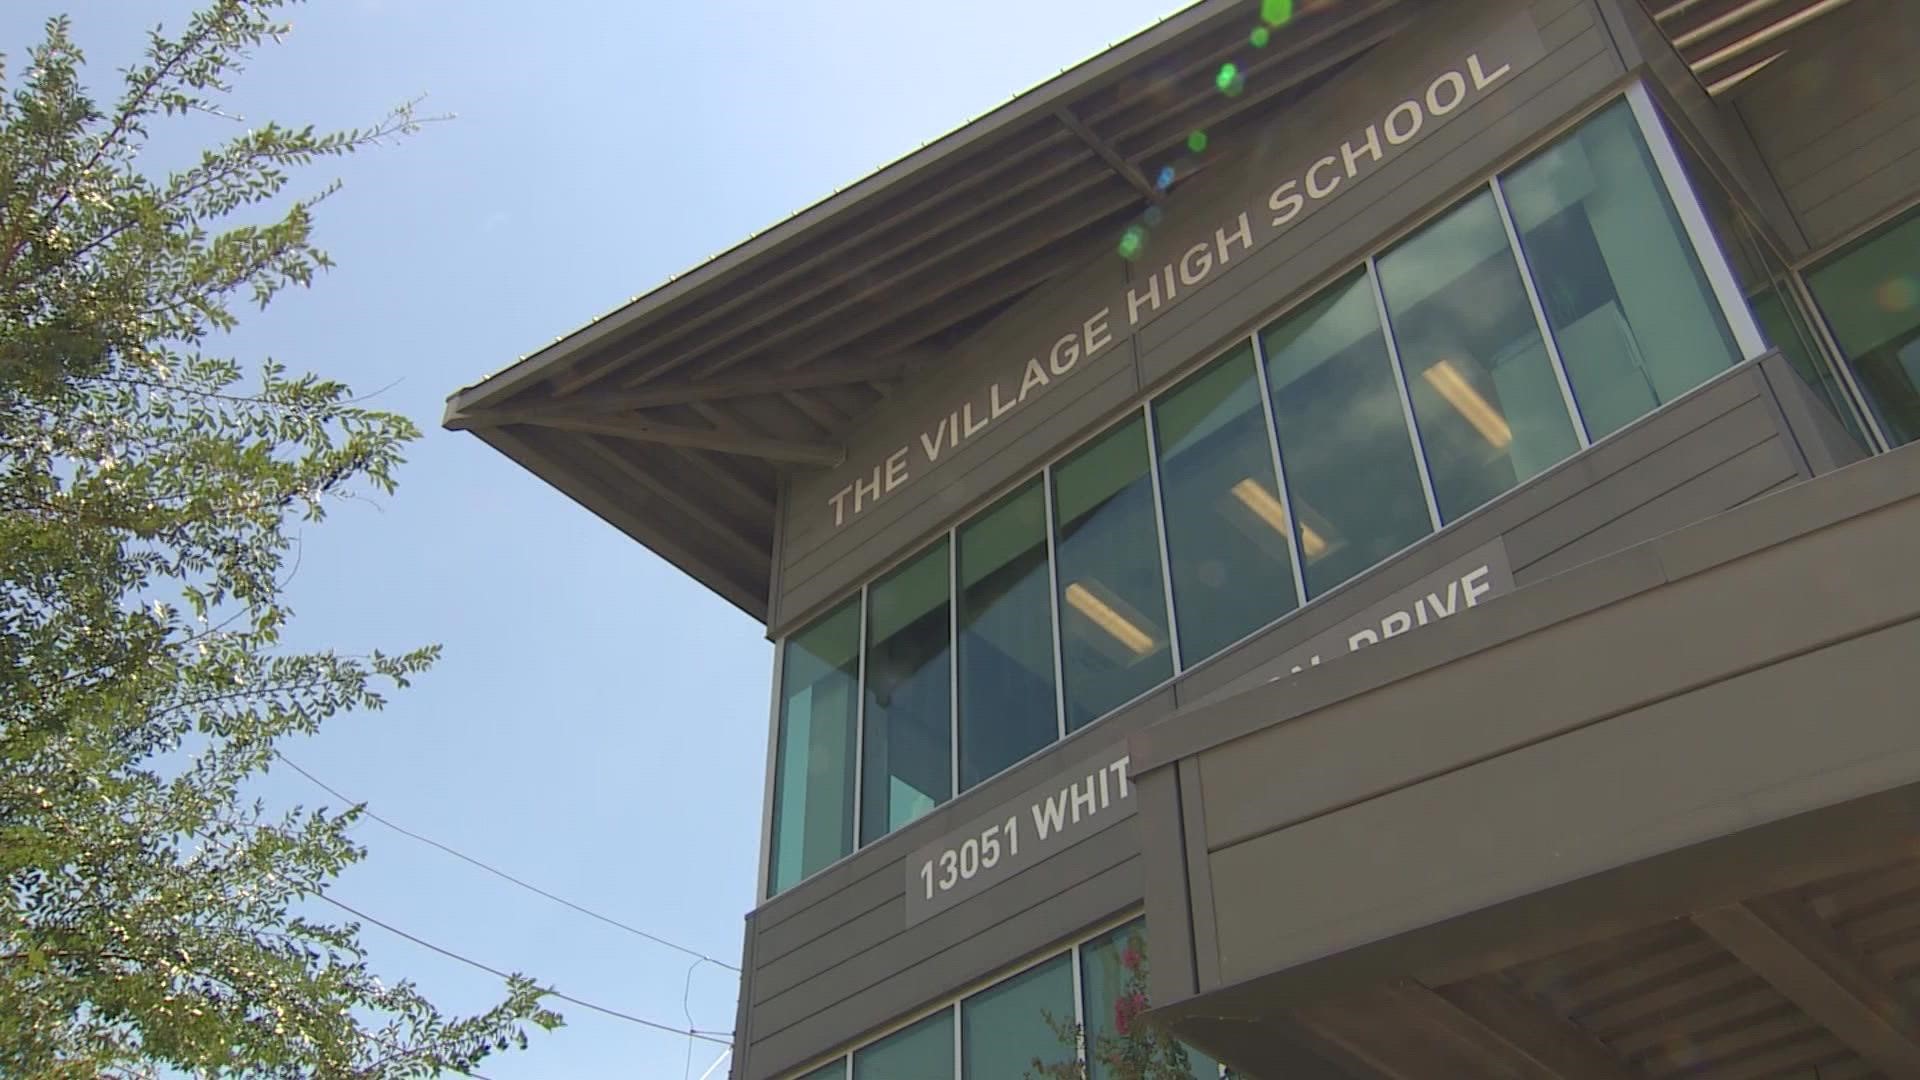 The Village School in west Houston is a global destination that serves some 1500 pre-K through 12th-grade students.